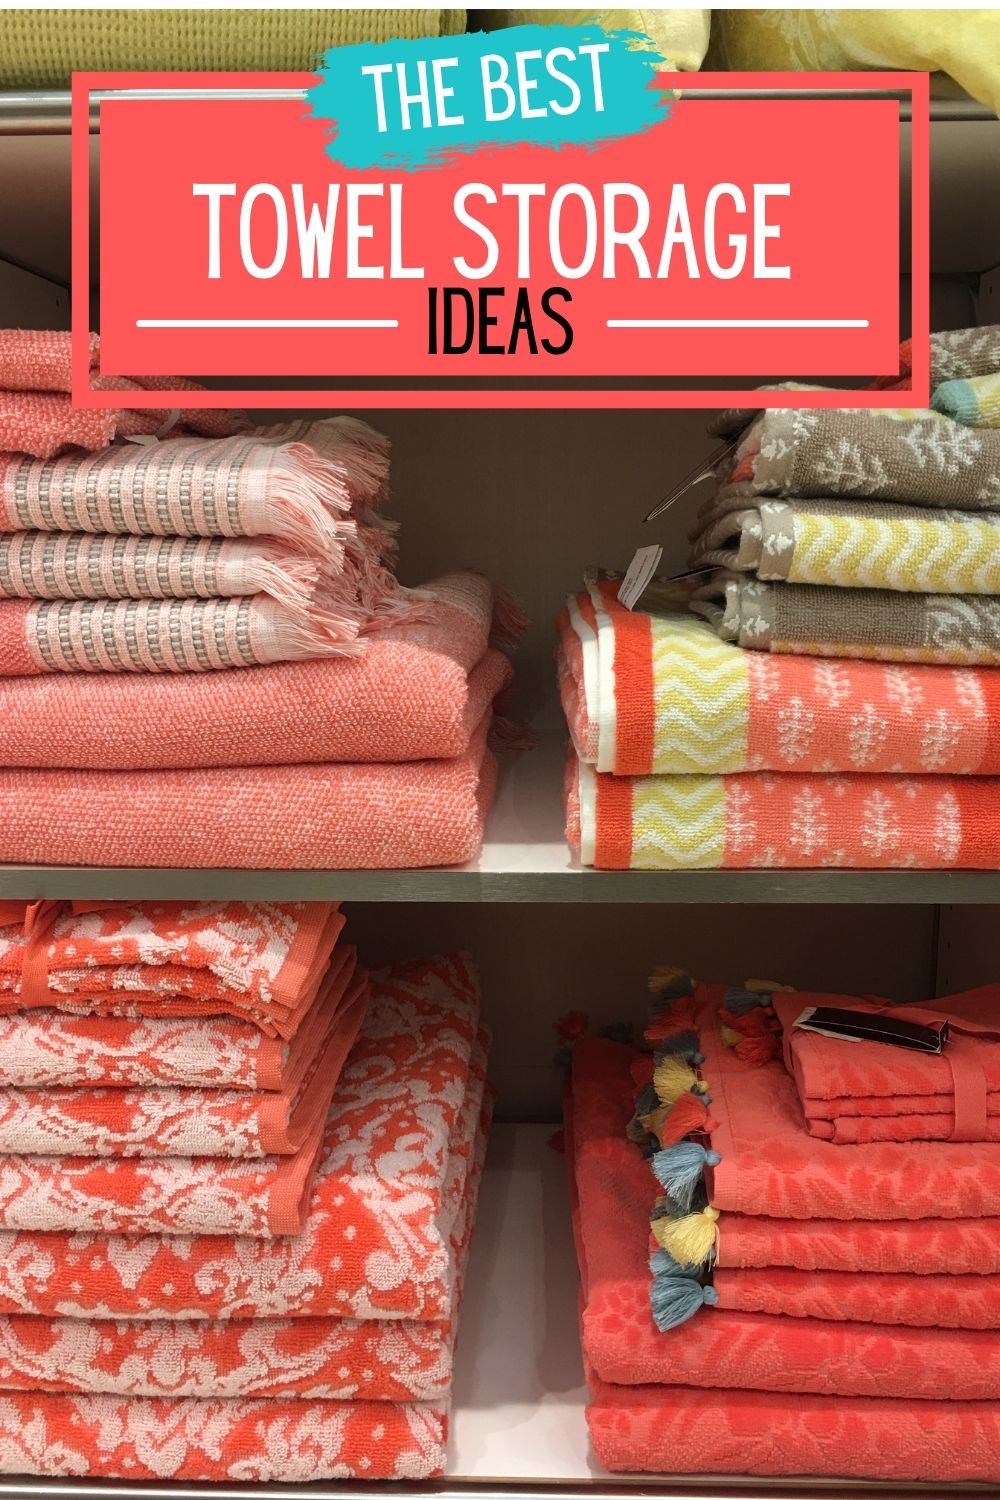 https://www.charlestoncrafted.com/wp-content/uploads/2021/06/the-best-towel-storage-ideas.jpg